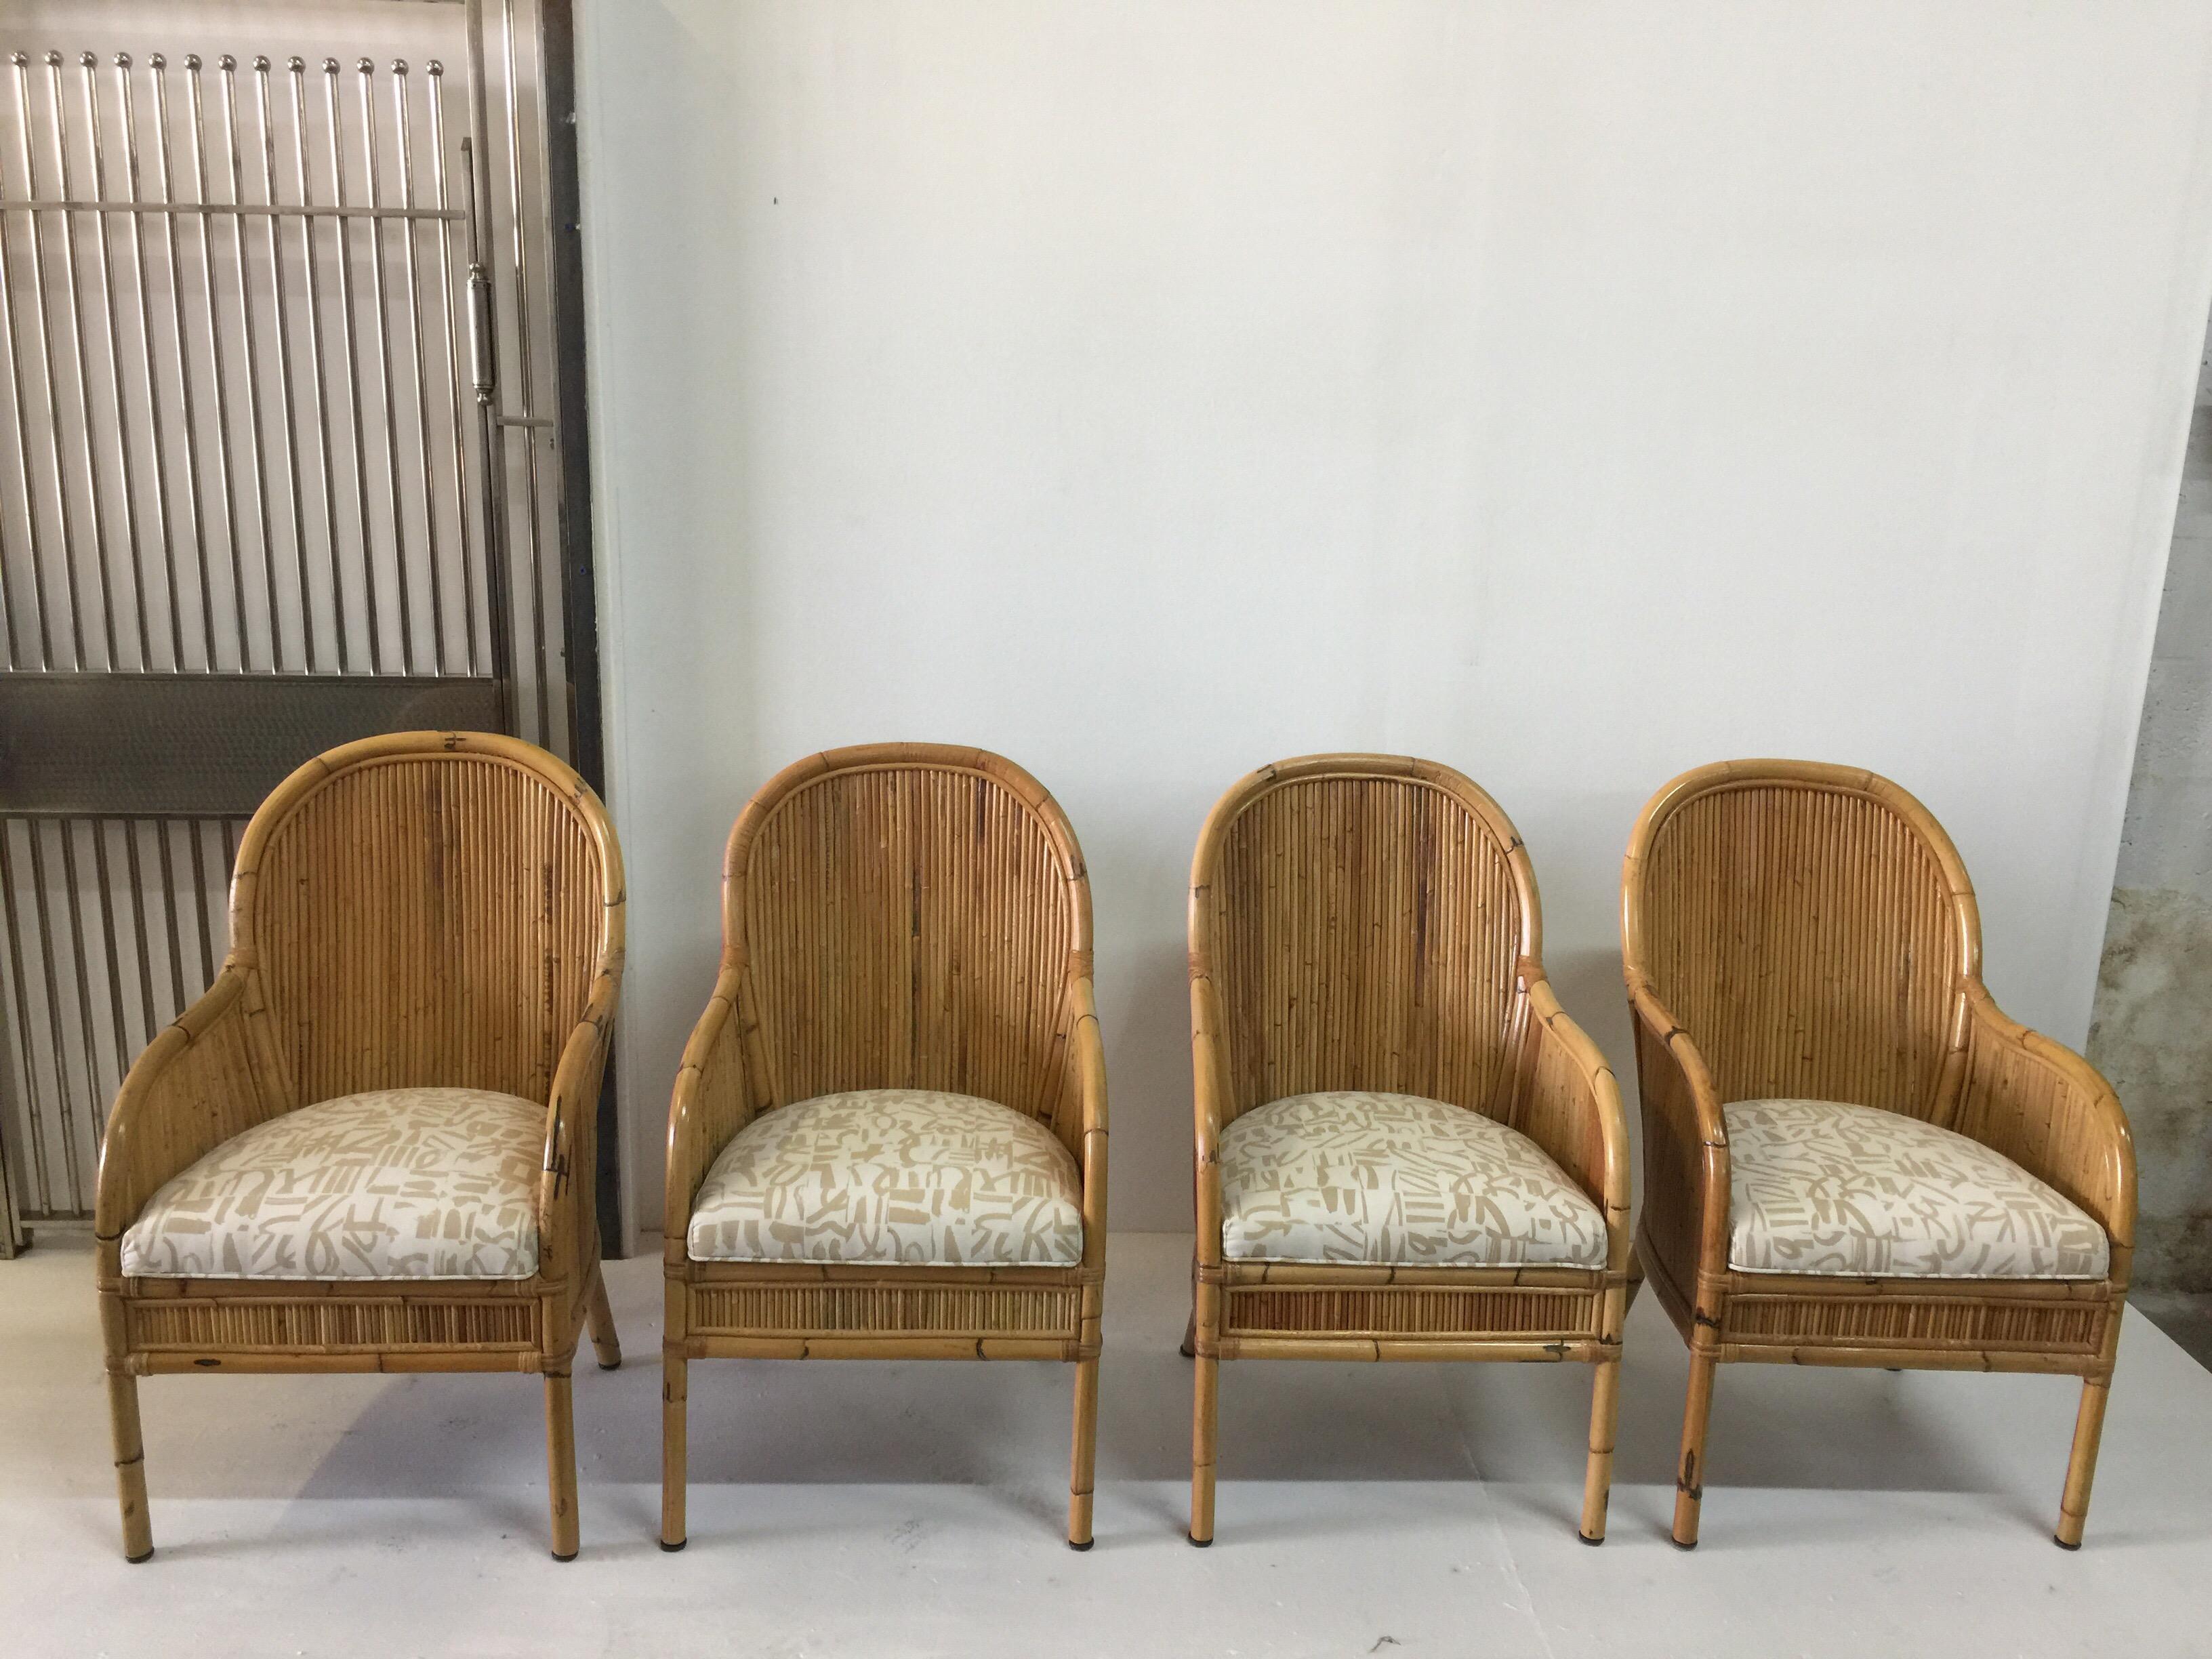 Vintage Henry Olko Set of 4 Bamboo Chairs For Sale 5